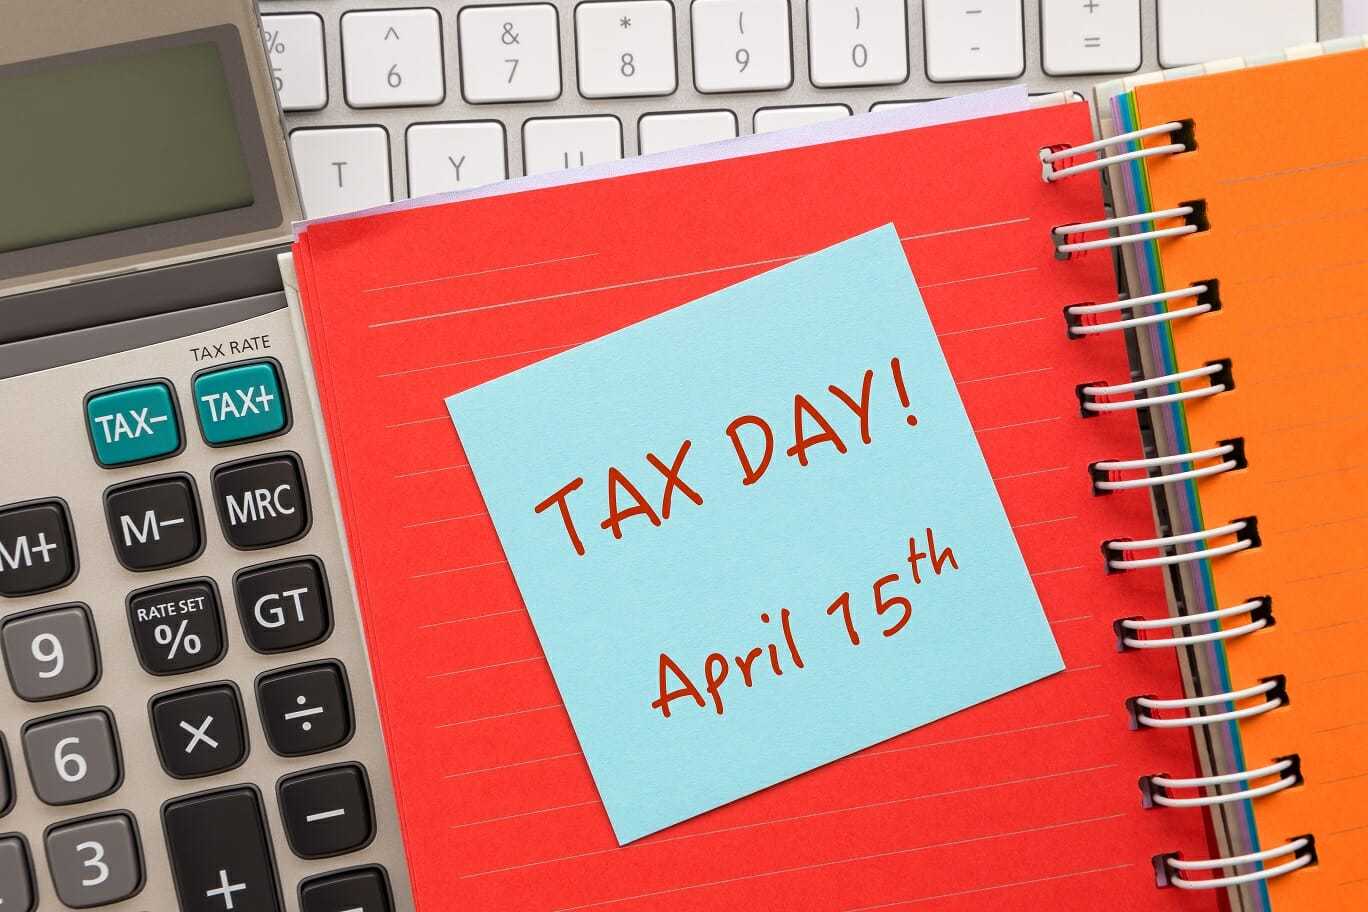 IRS, DOJ Continue Tax Enforcement Crackdown As Tax Day Approaches